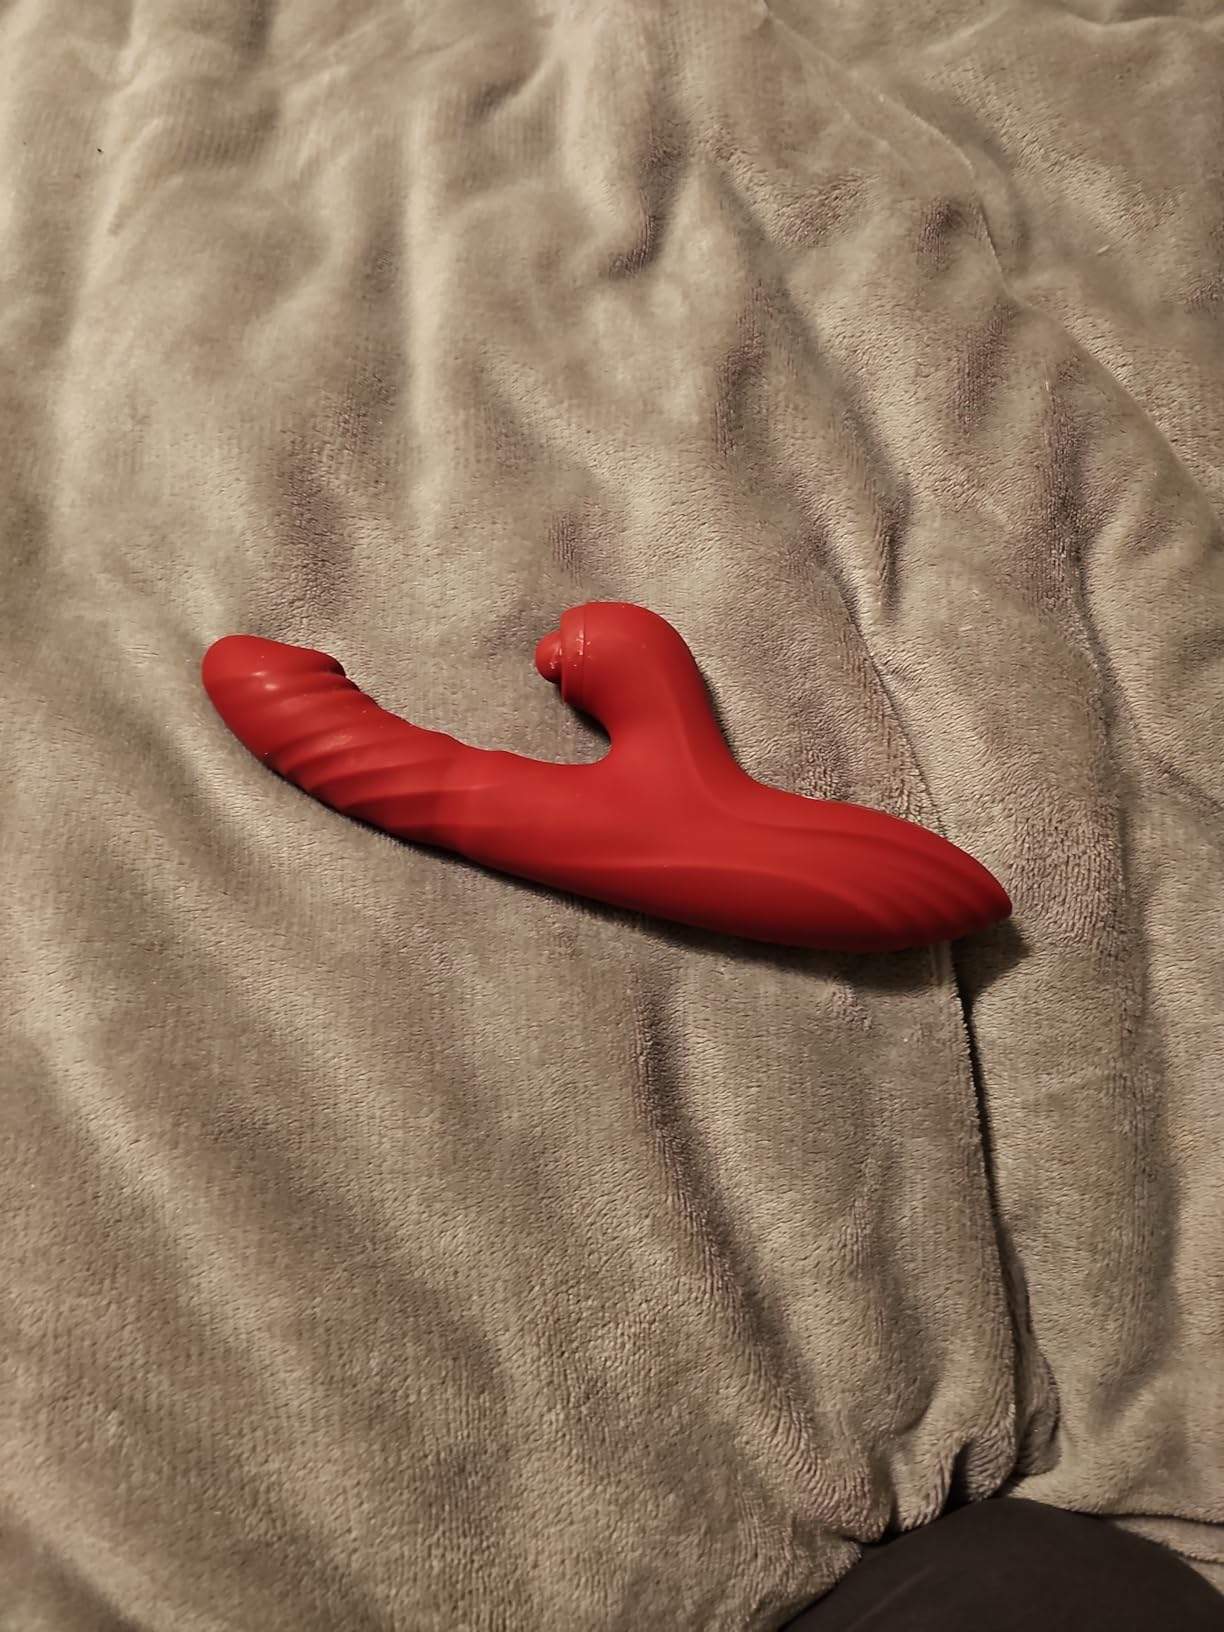 Rabbit Sucking Vibrator with 10 Vibrating 7 Thrust Modes with Licking